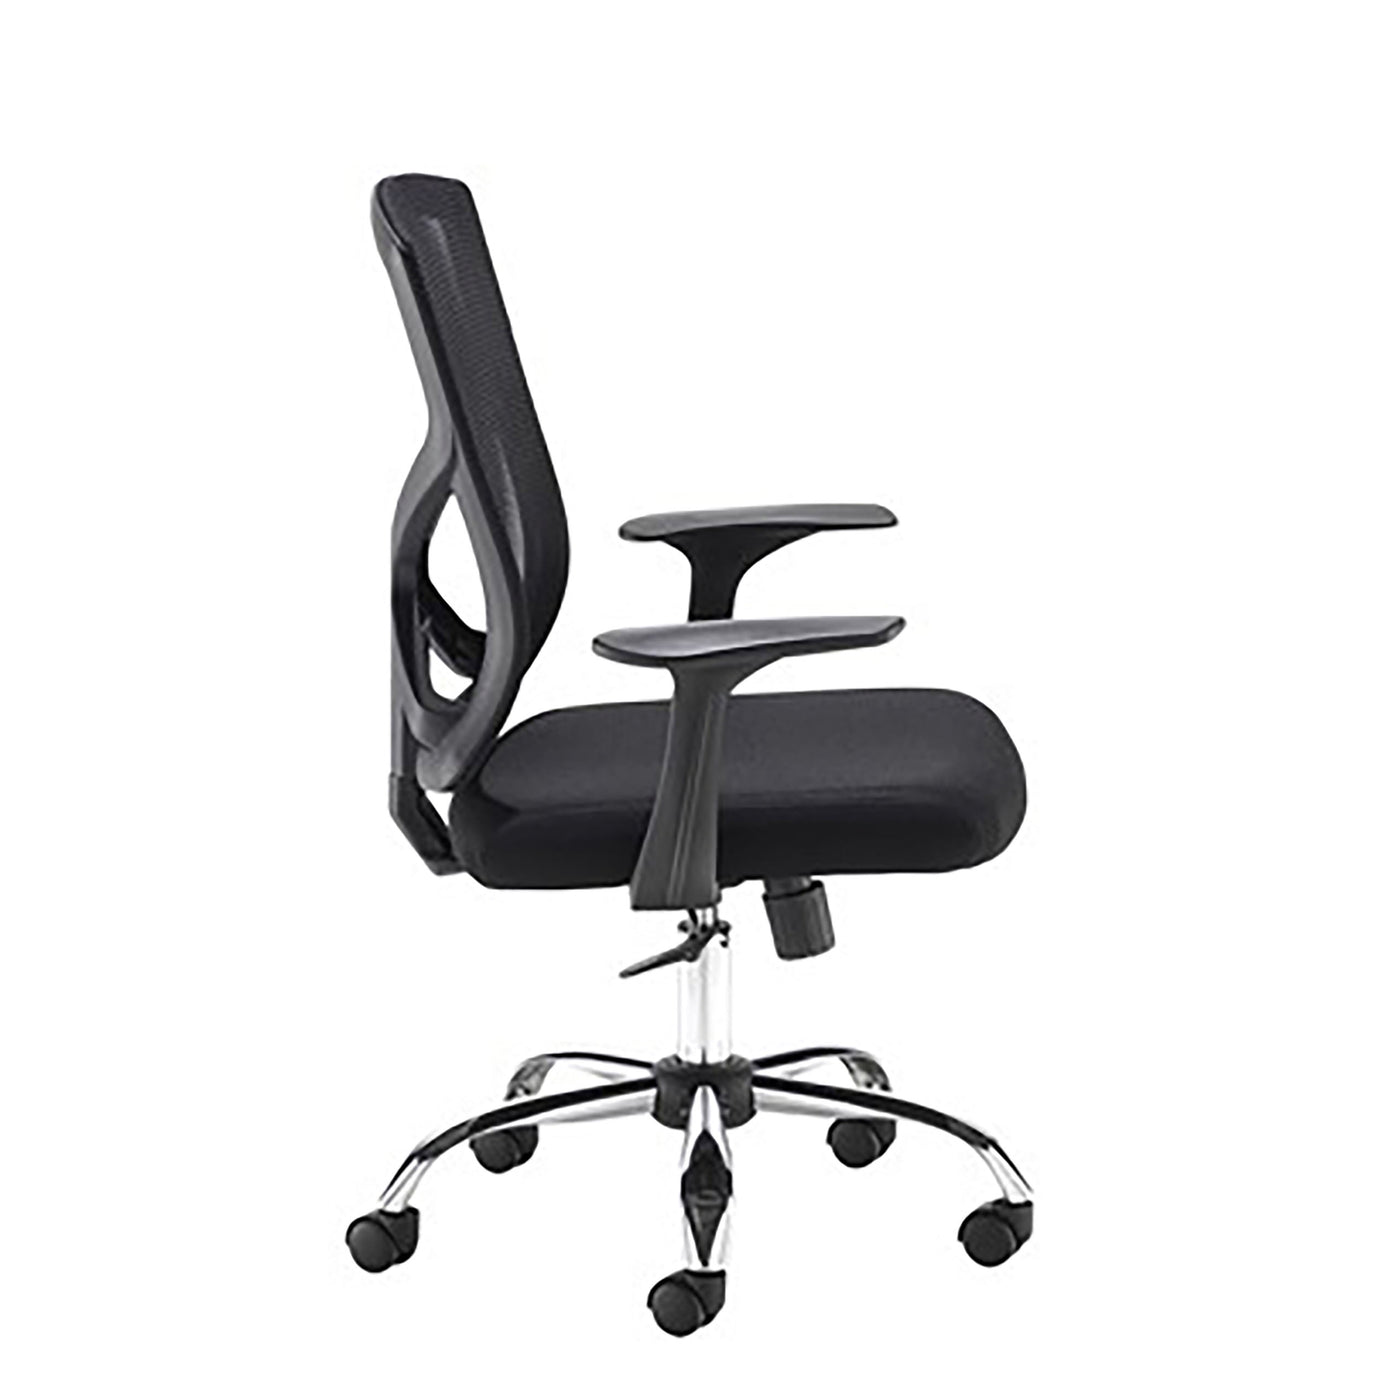 Hale Mesh Home Office Chair | Ergonomic Home Office Furniture